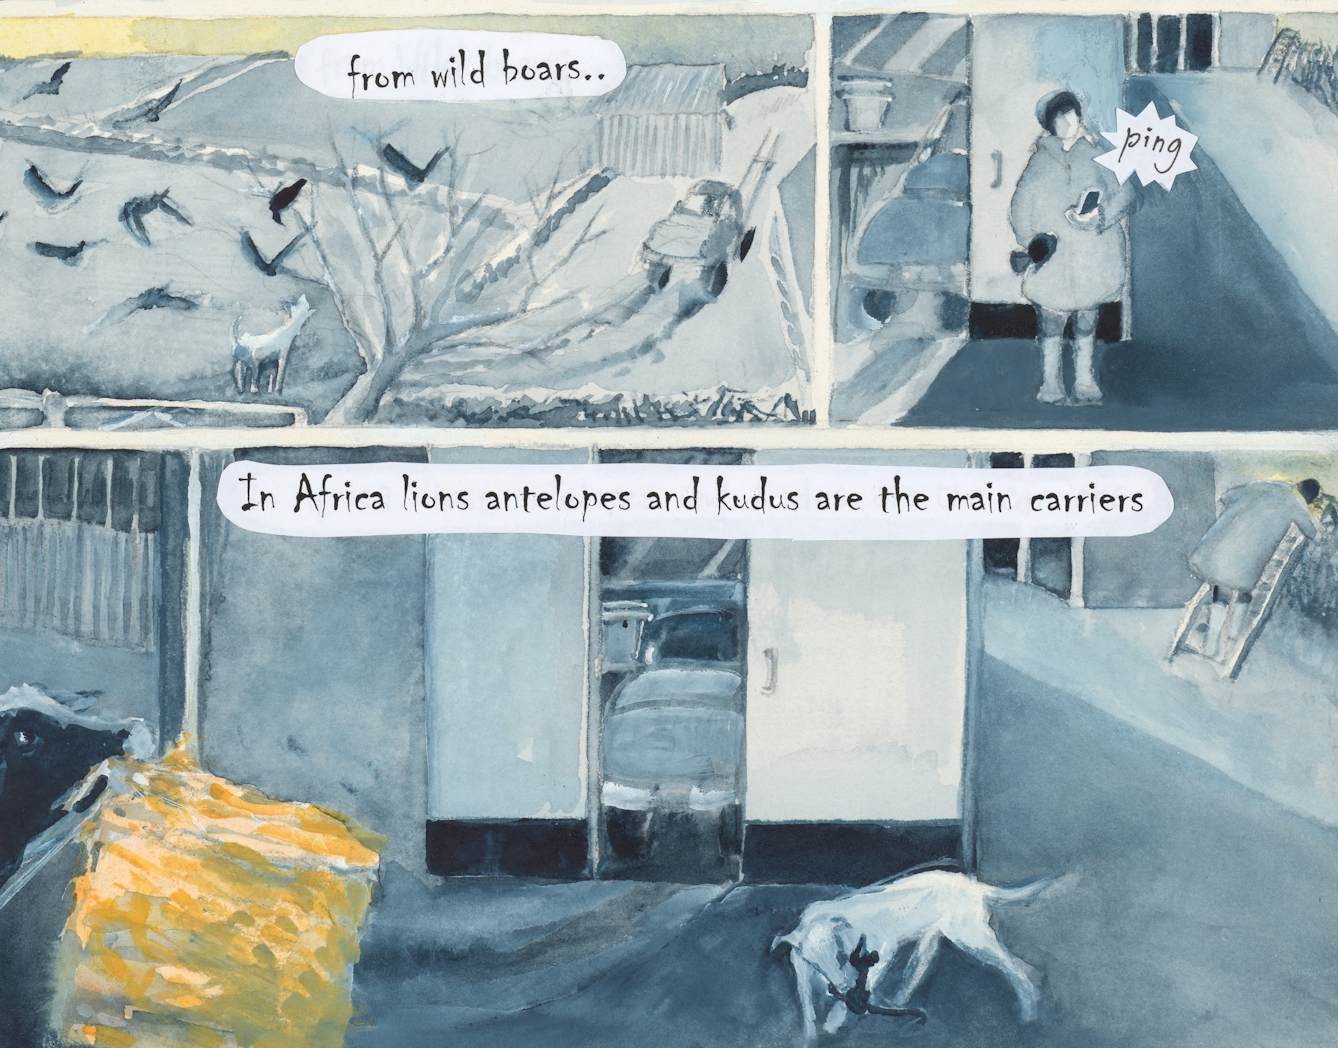 Watercolour comic set on a farm. Text: 'from wild boars...' 'In Africa lions and antelopes and kudus are the main carriers'.